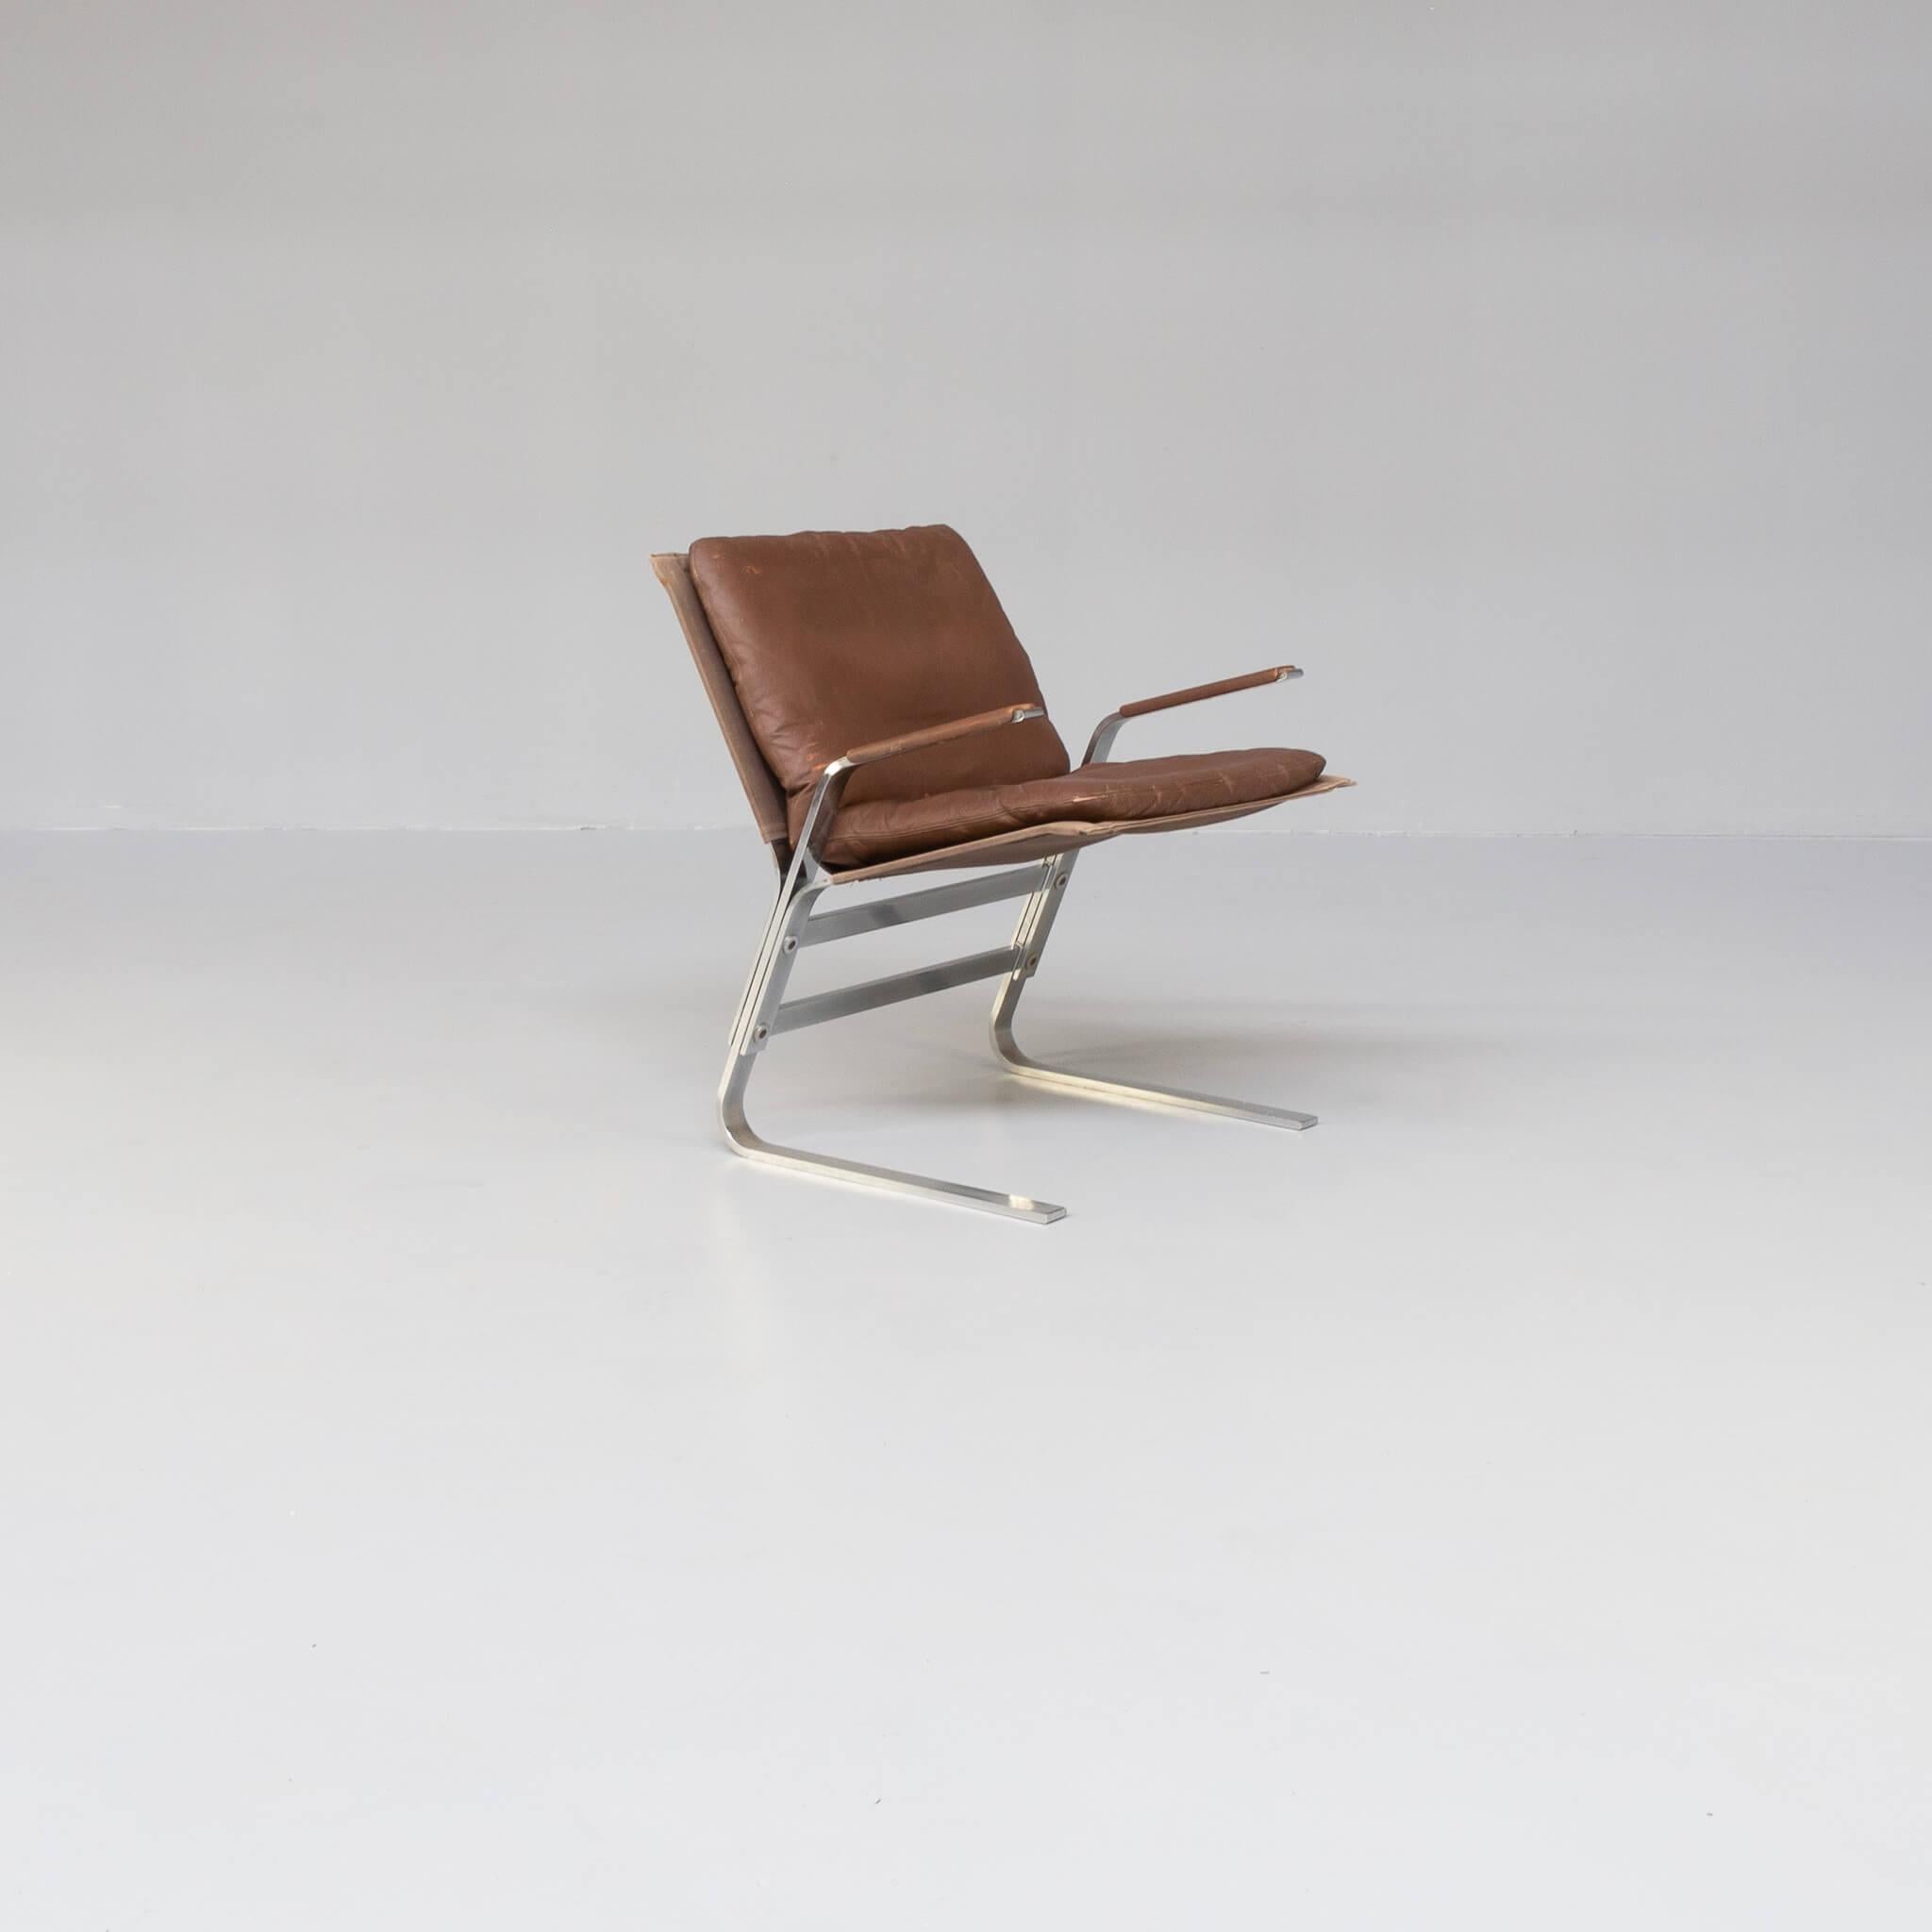 Dutch Metal, Canvas and Leather Designer Fauteuil For Sale